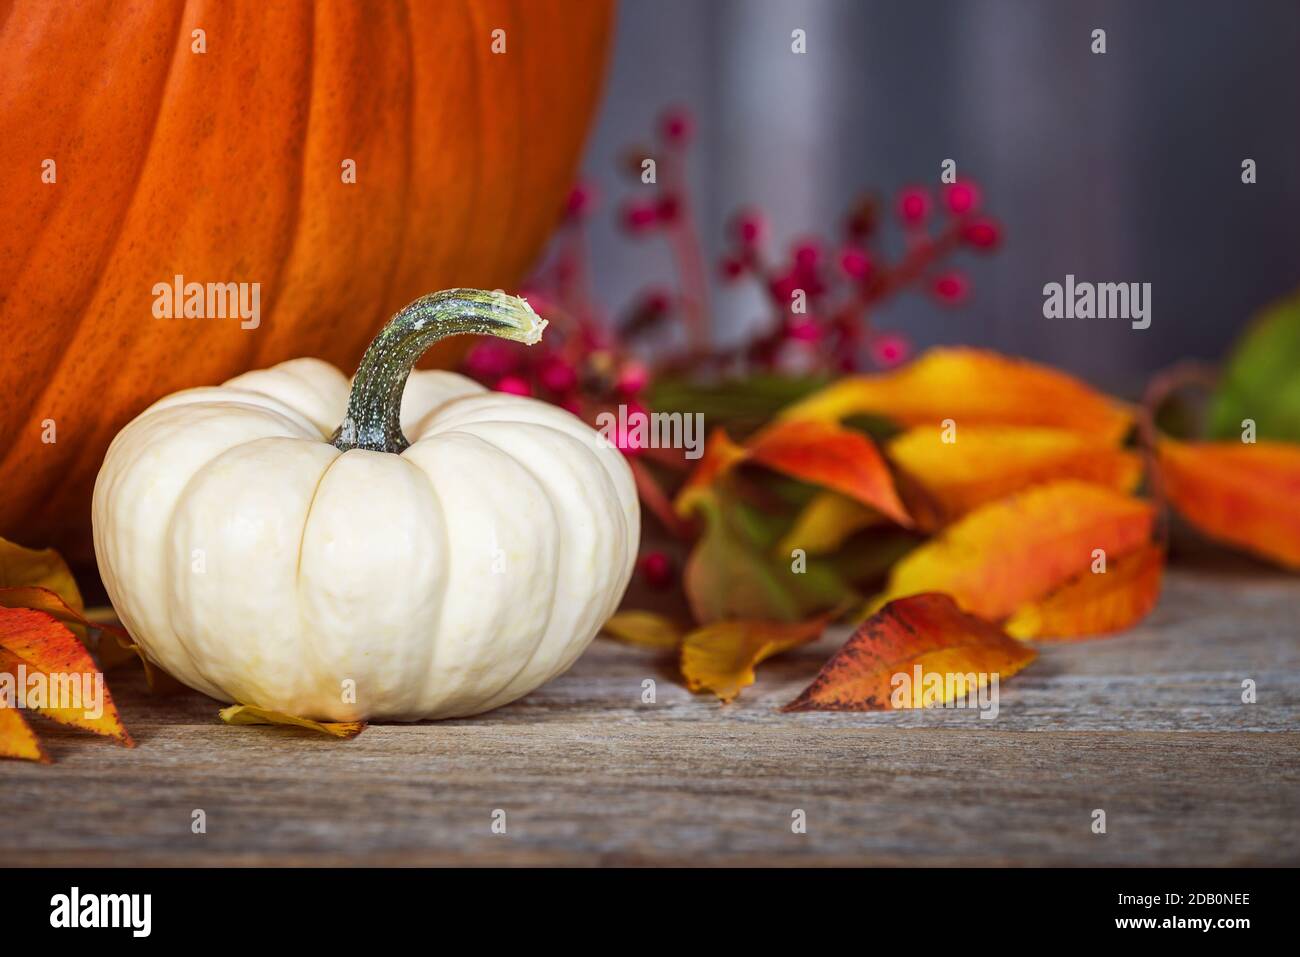 White Mini pumpkin on rustic wooden table. Displayed with colorful autumn leaves and berries. A pumpkin in the background. Stock Photo